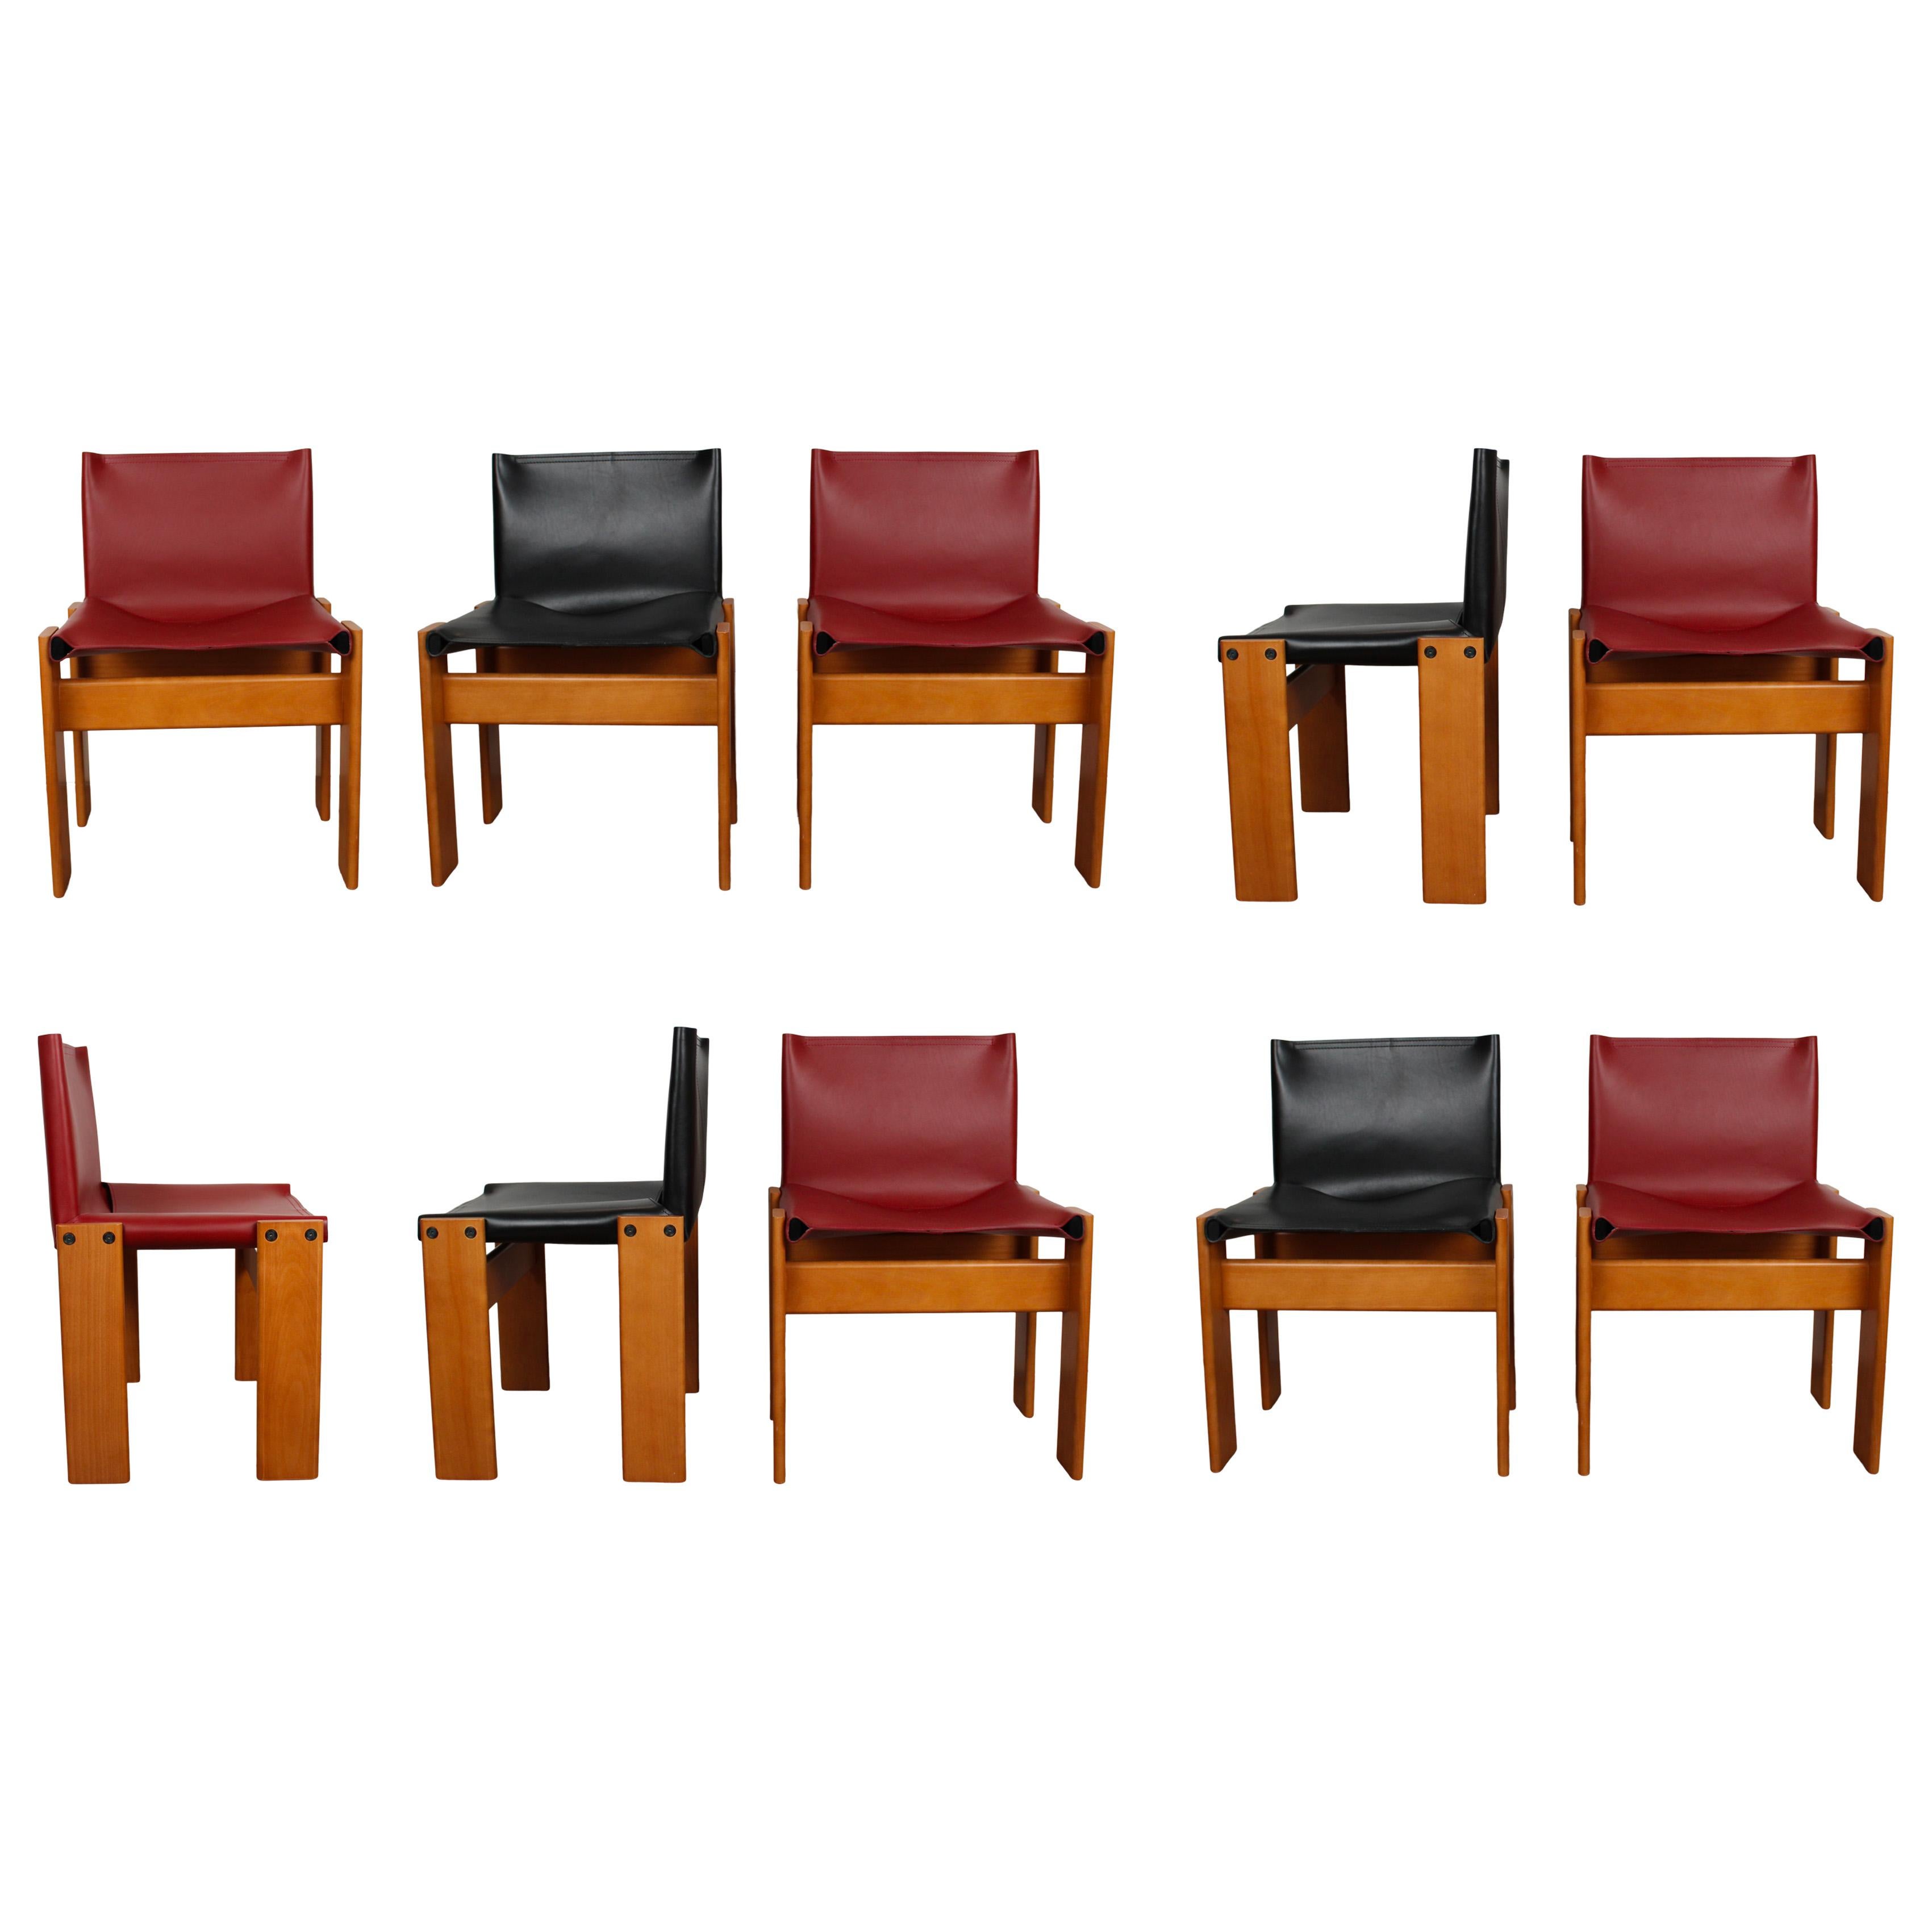 Set of ten “Monk” dining chairs designed by Afra and Tobia Scarpa for Molteni in 1973.
Made of English red and black leather and walnut.
Fully restored in Italy.

Interesting is the ‘flat’ shape of this chair where the designer has chosen to place